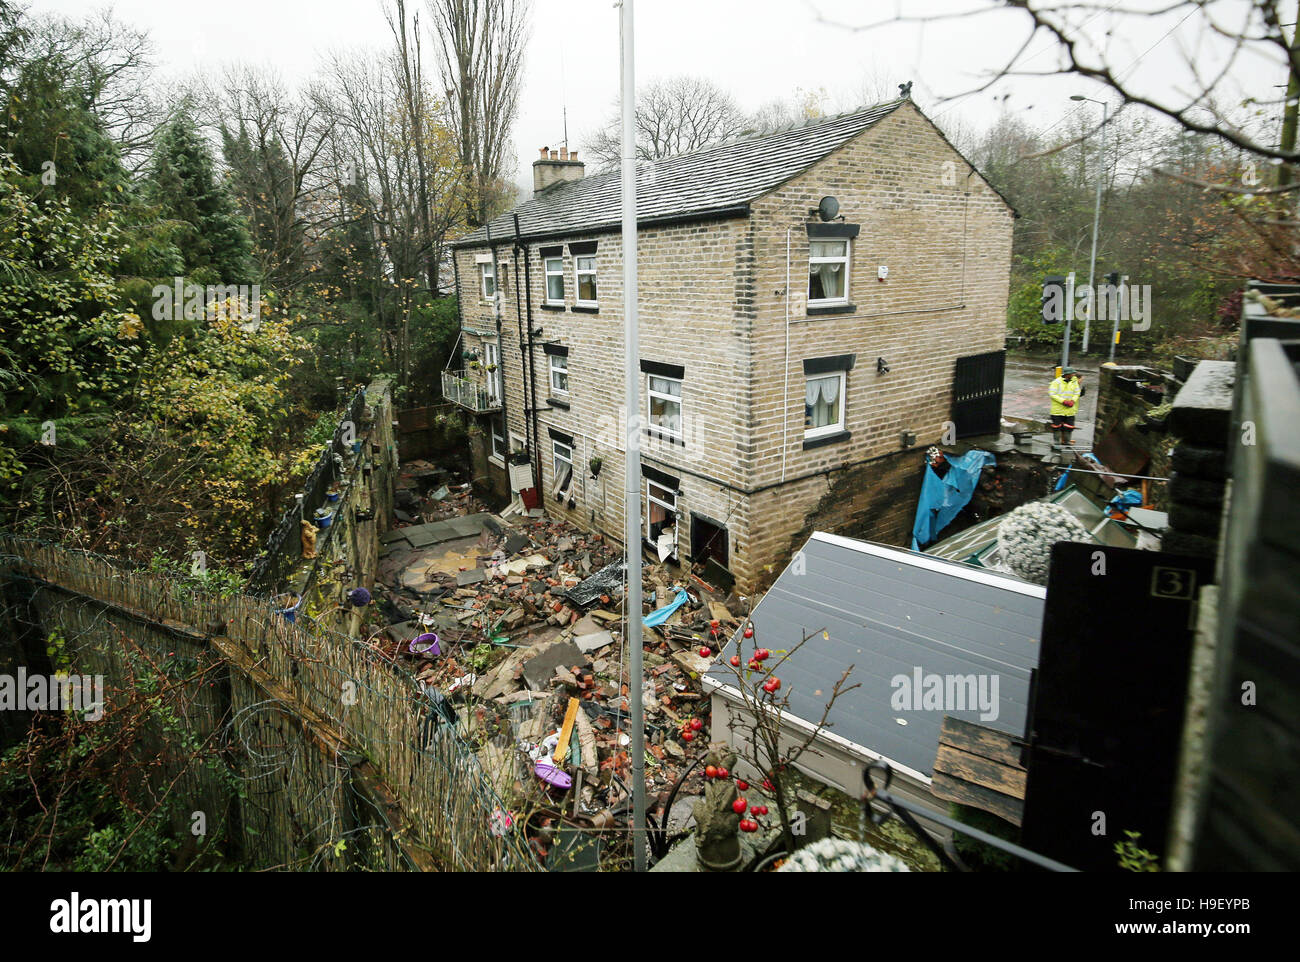 Flood damage at a property in Millbrook near Stalybridge in Greater Manchester after heavy rain overnight, as wind and rain continue to blight parts of Britain threatening further travel chaos after torrential downpours caused flash-flooding and disruption across most of the country. Stock Photo